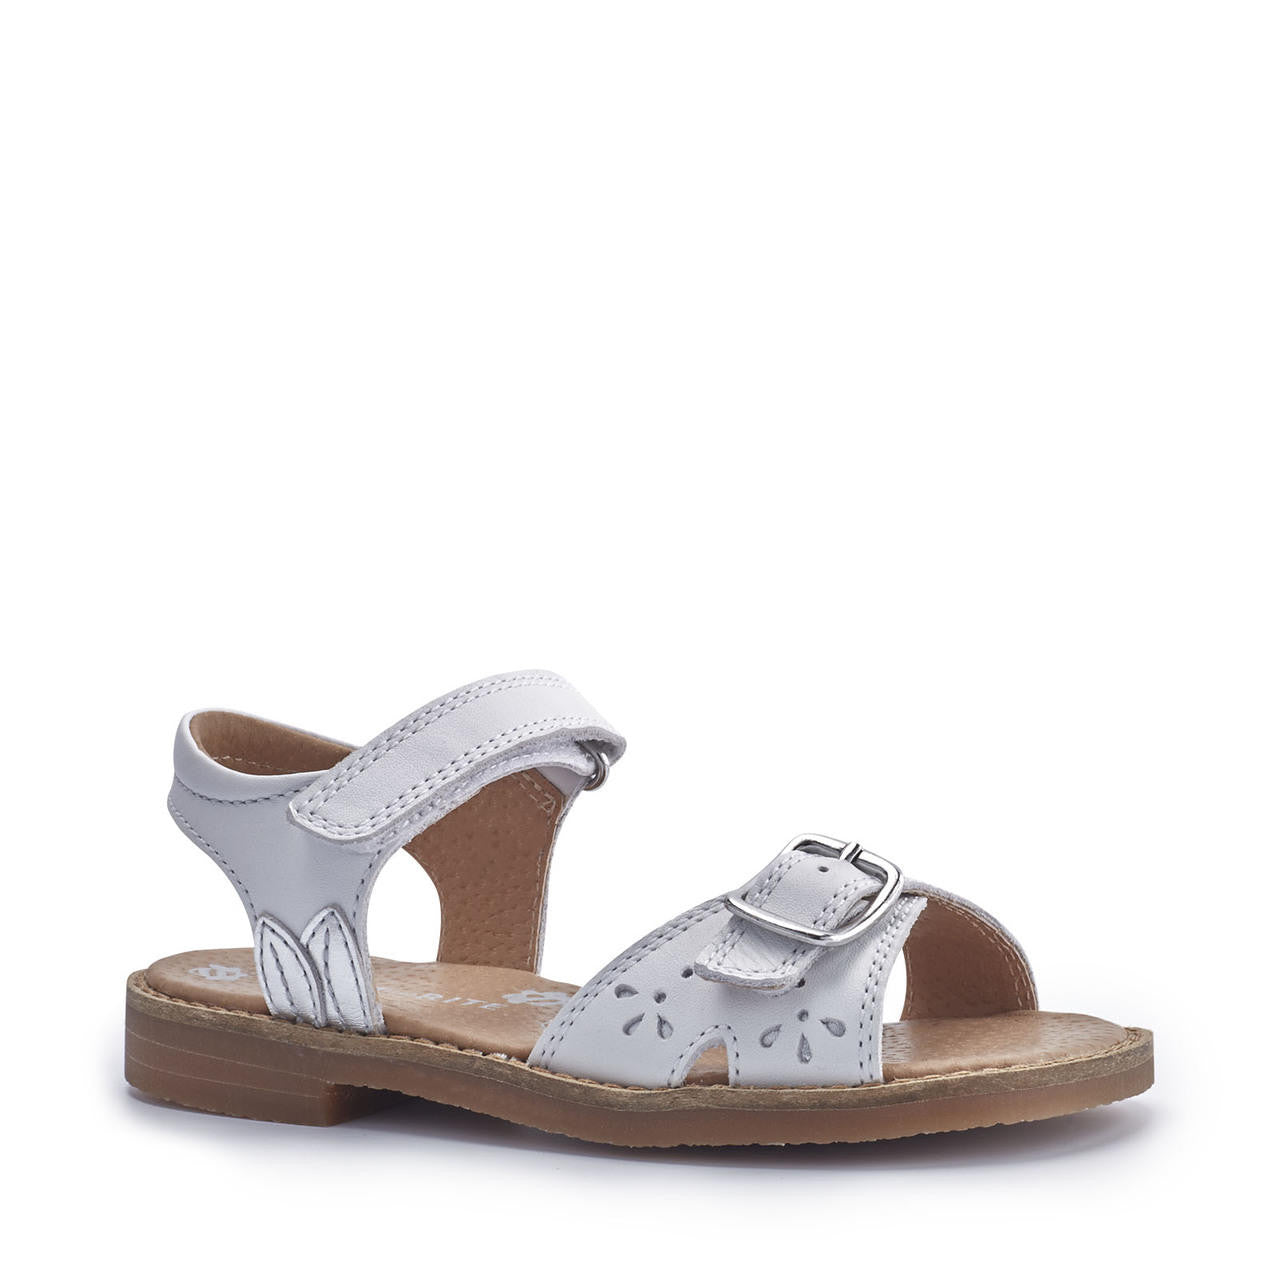 A girls open toe sandal by Start Rite, style Holiday in white leather with Velcro fastening. Angled view.